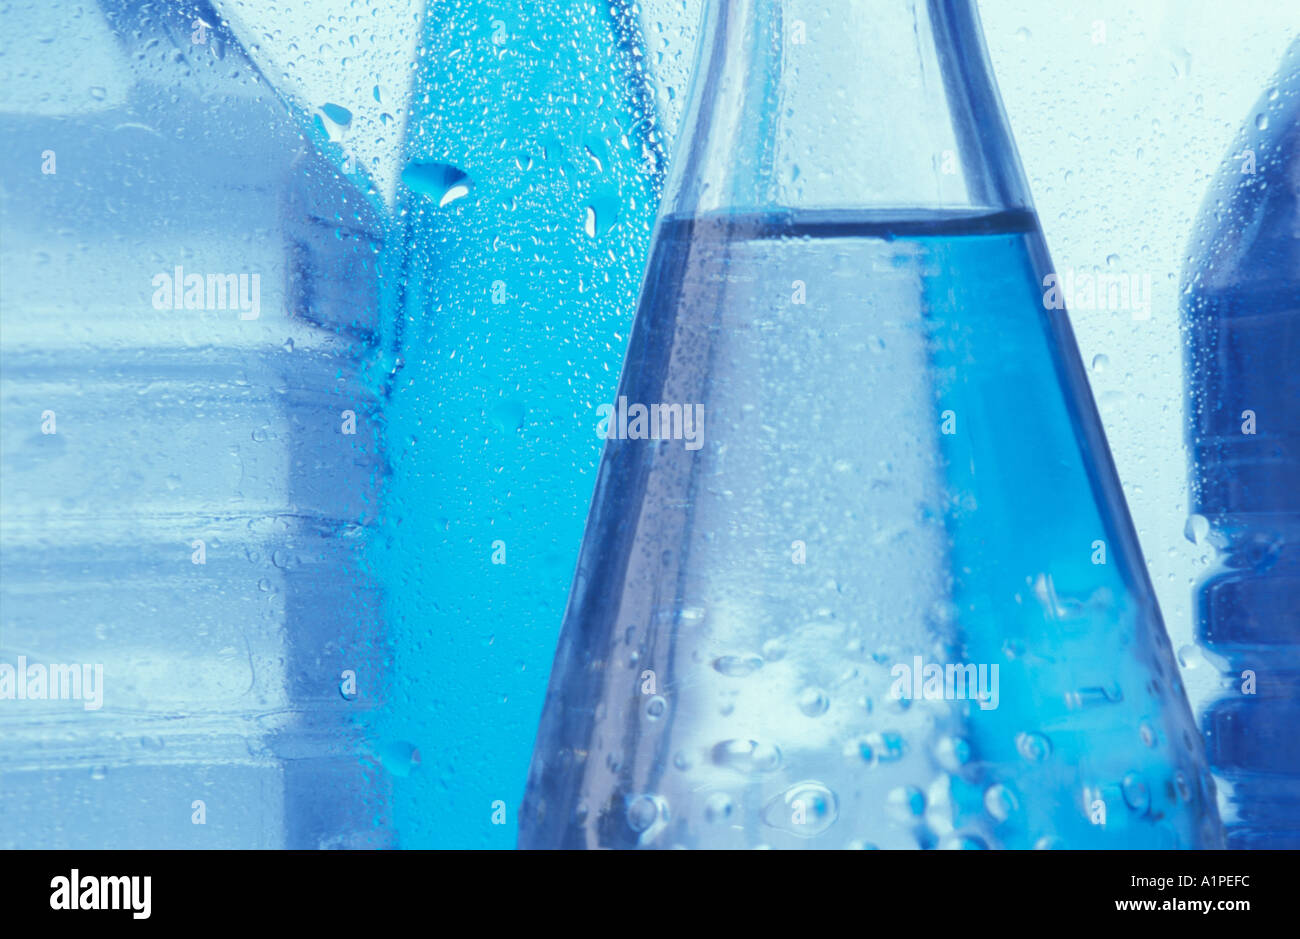 Mid section of cold bottled water Stock Photo